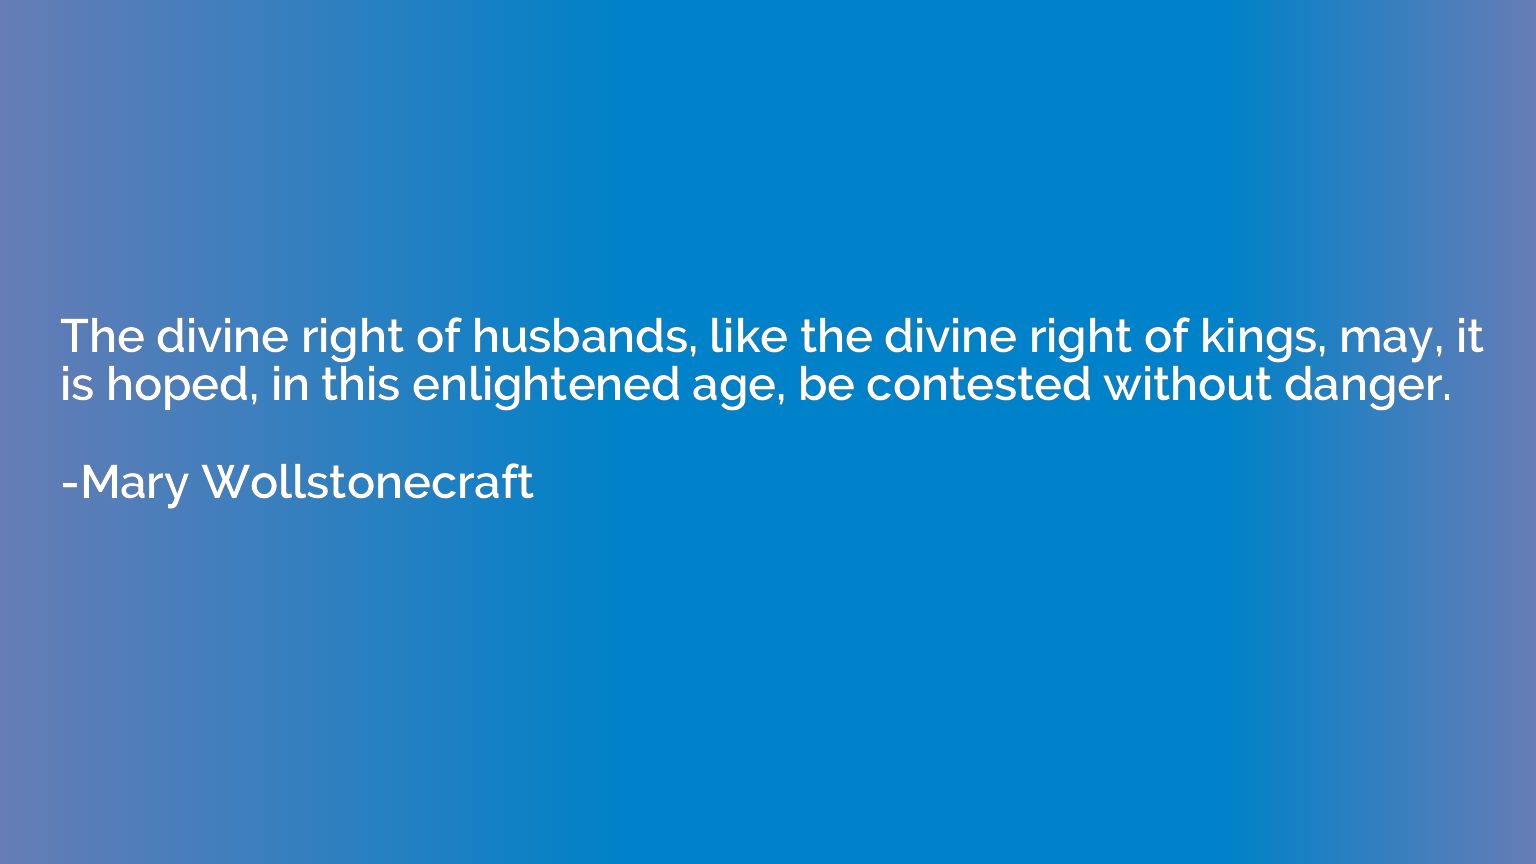 The divine right of husbands, like the divine right of kings